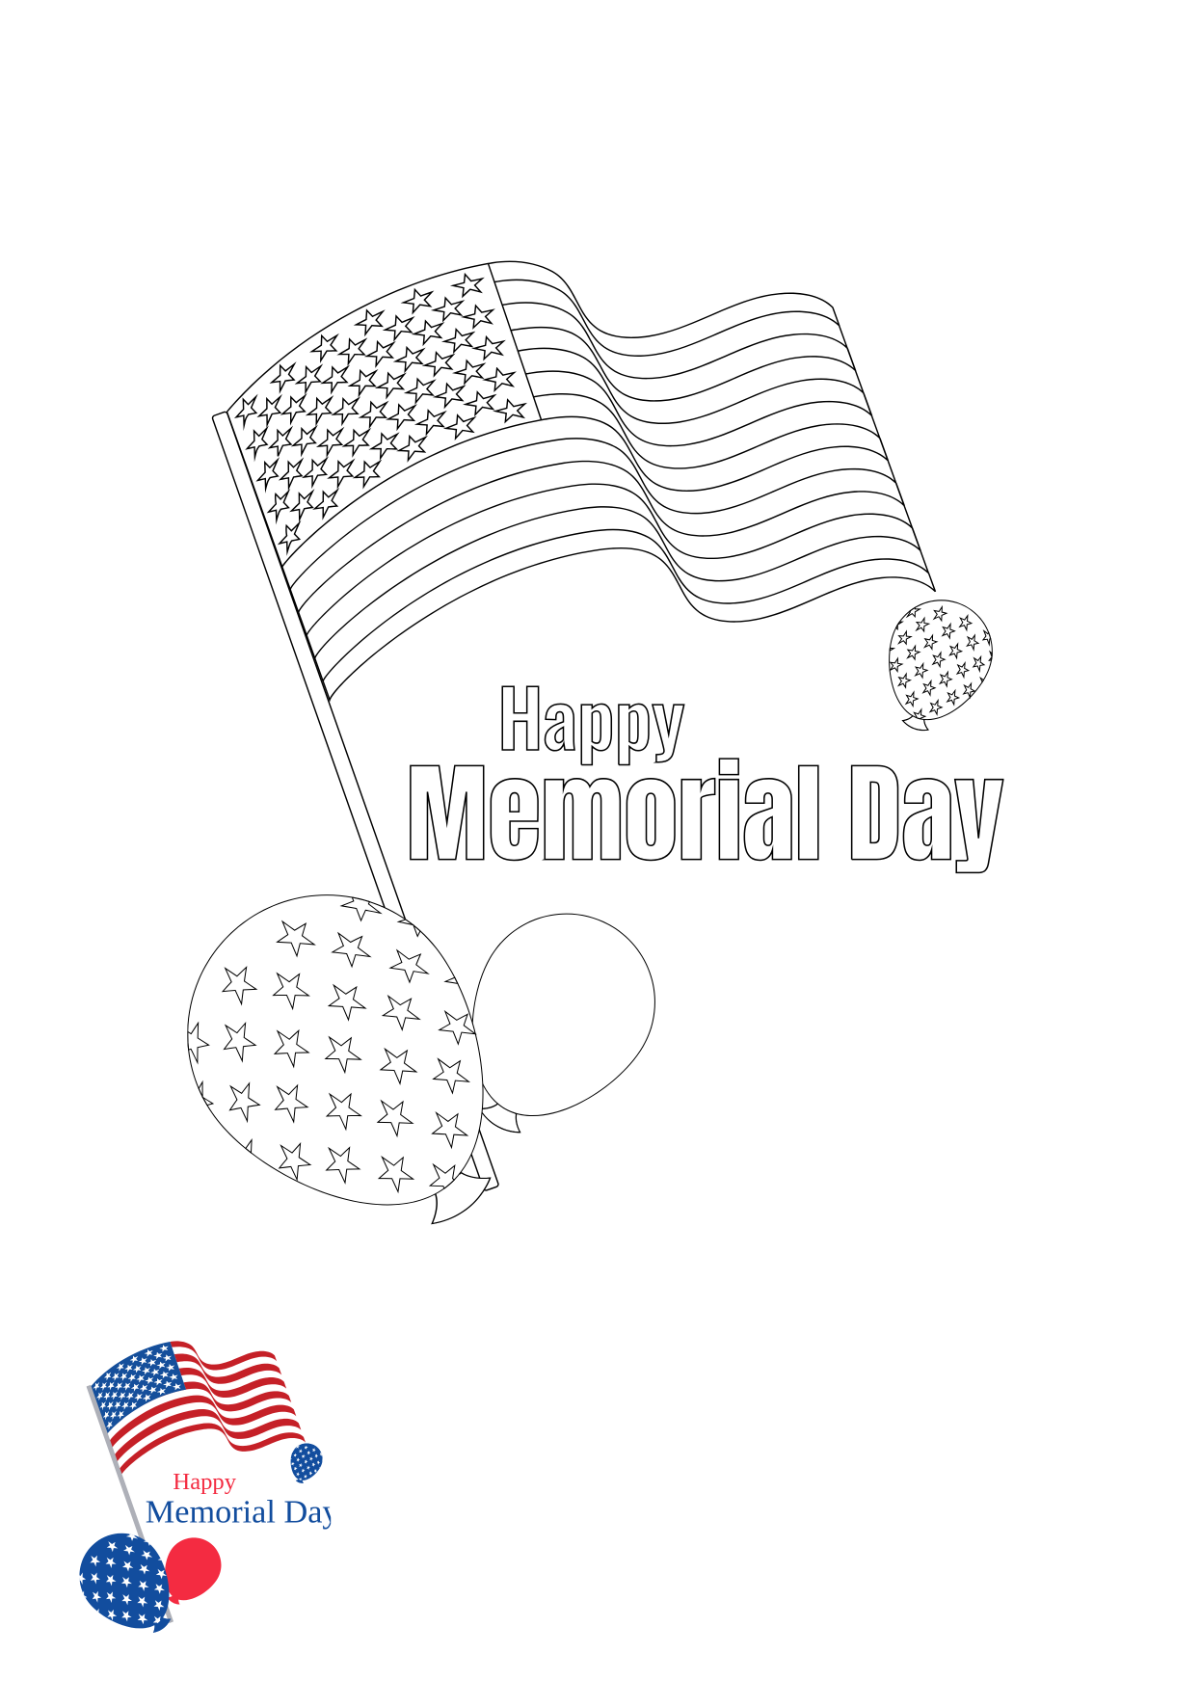 Happy Memorial Day Coloring Page Template